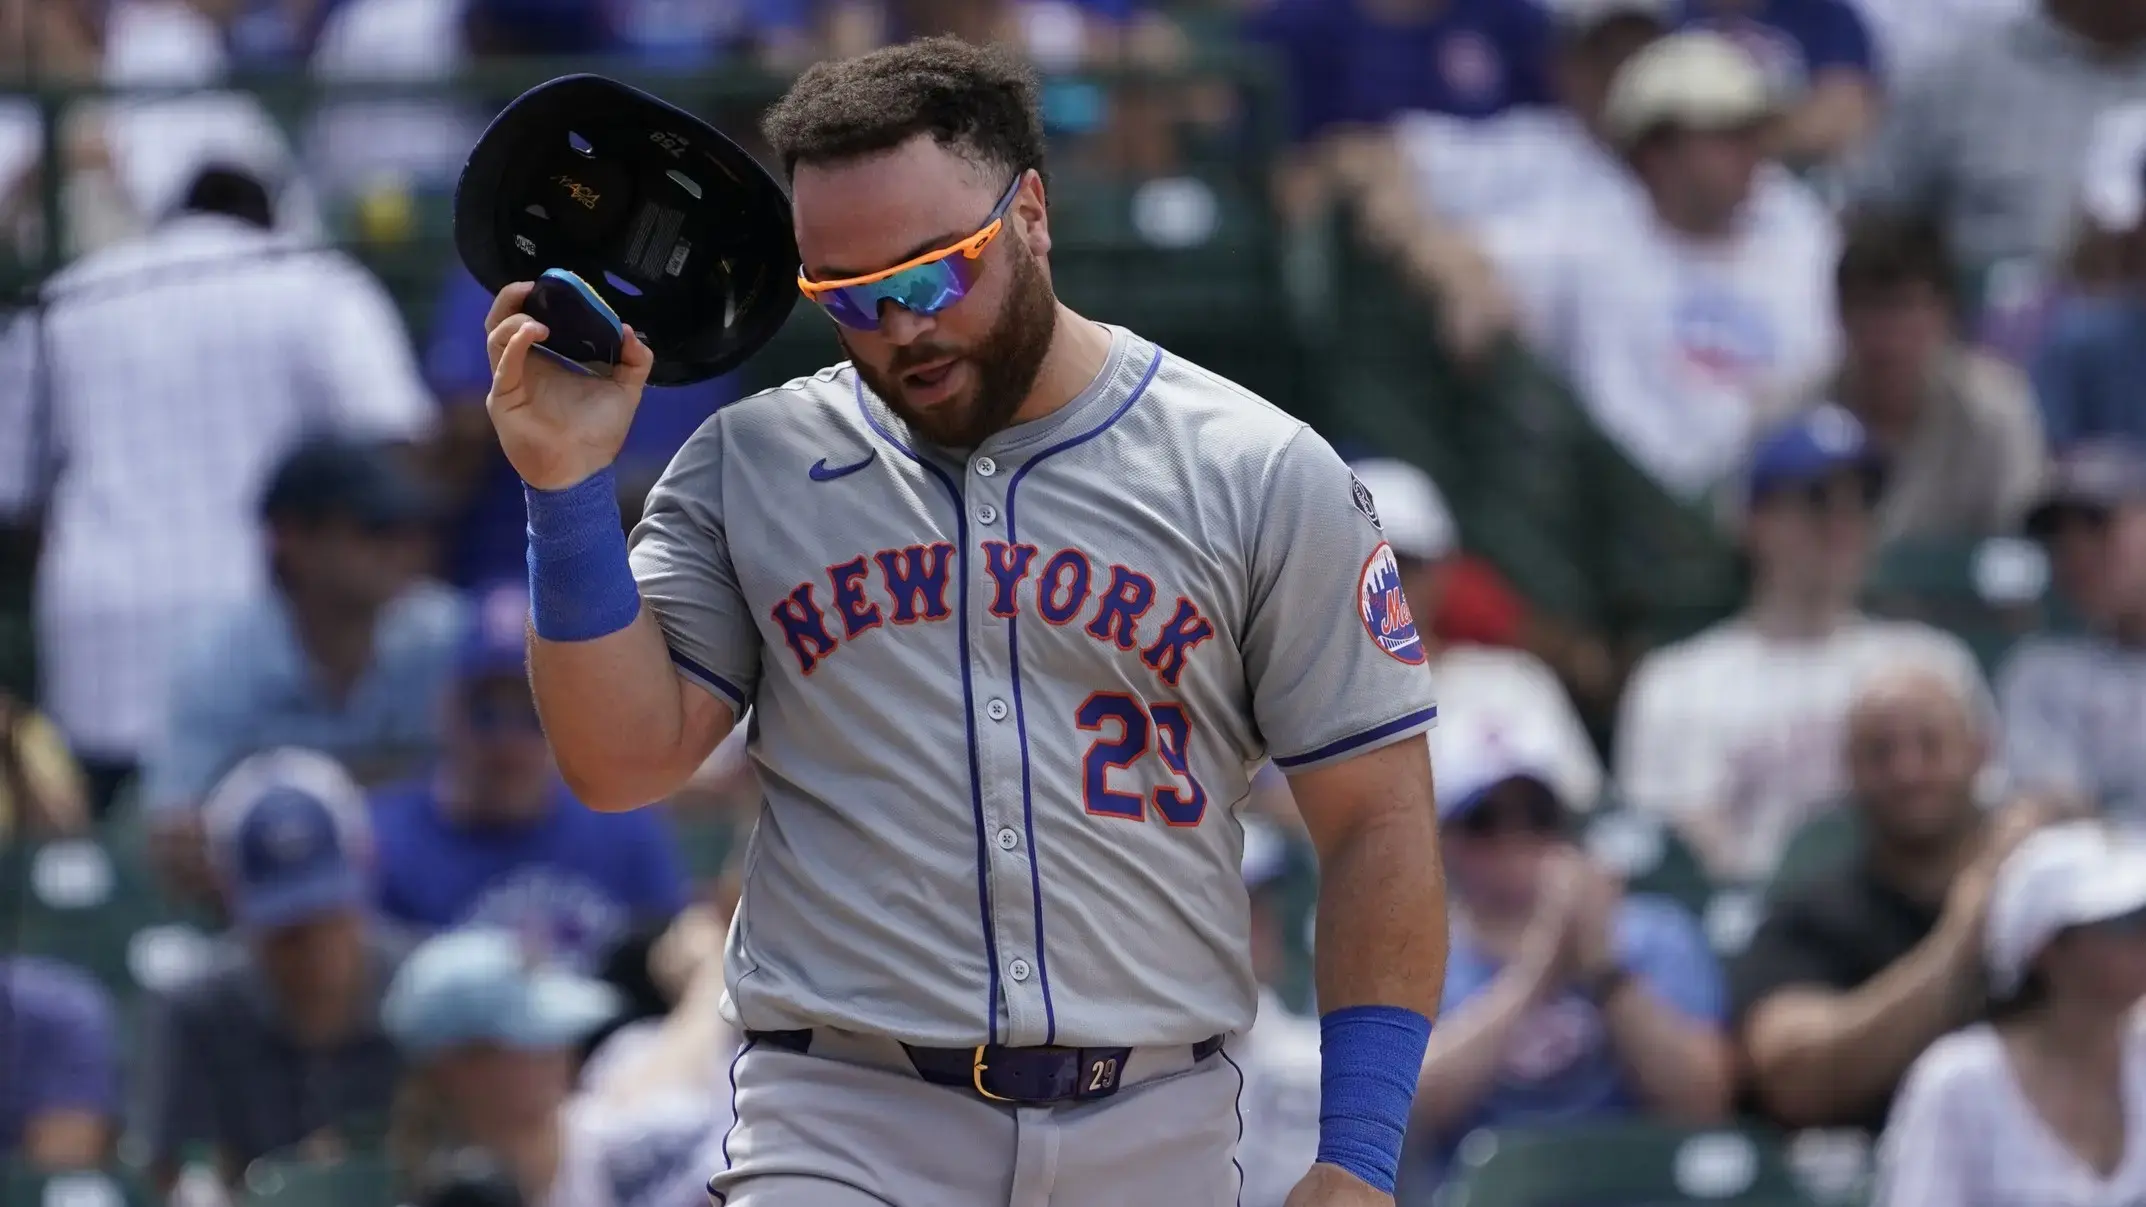 It's time for Mets to address the DJ Stewart situation